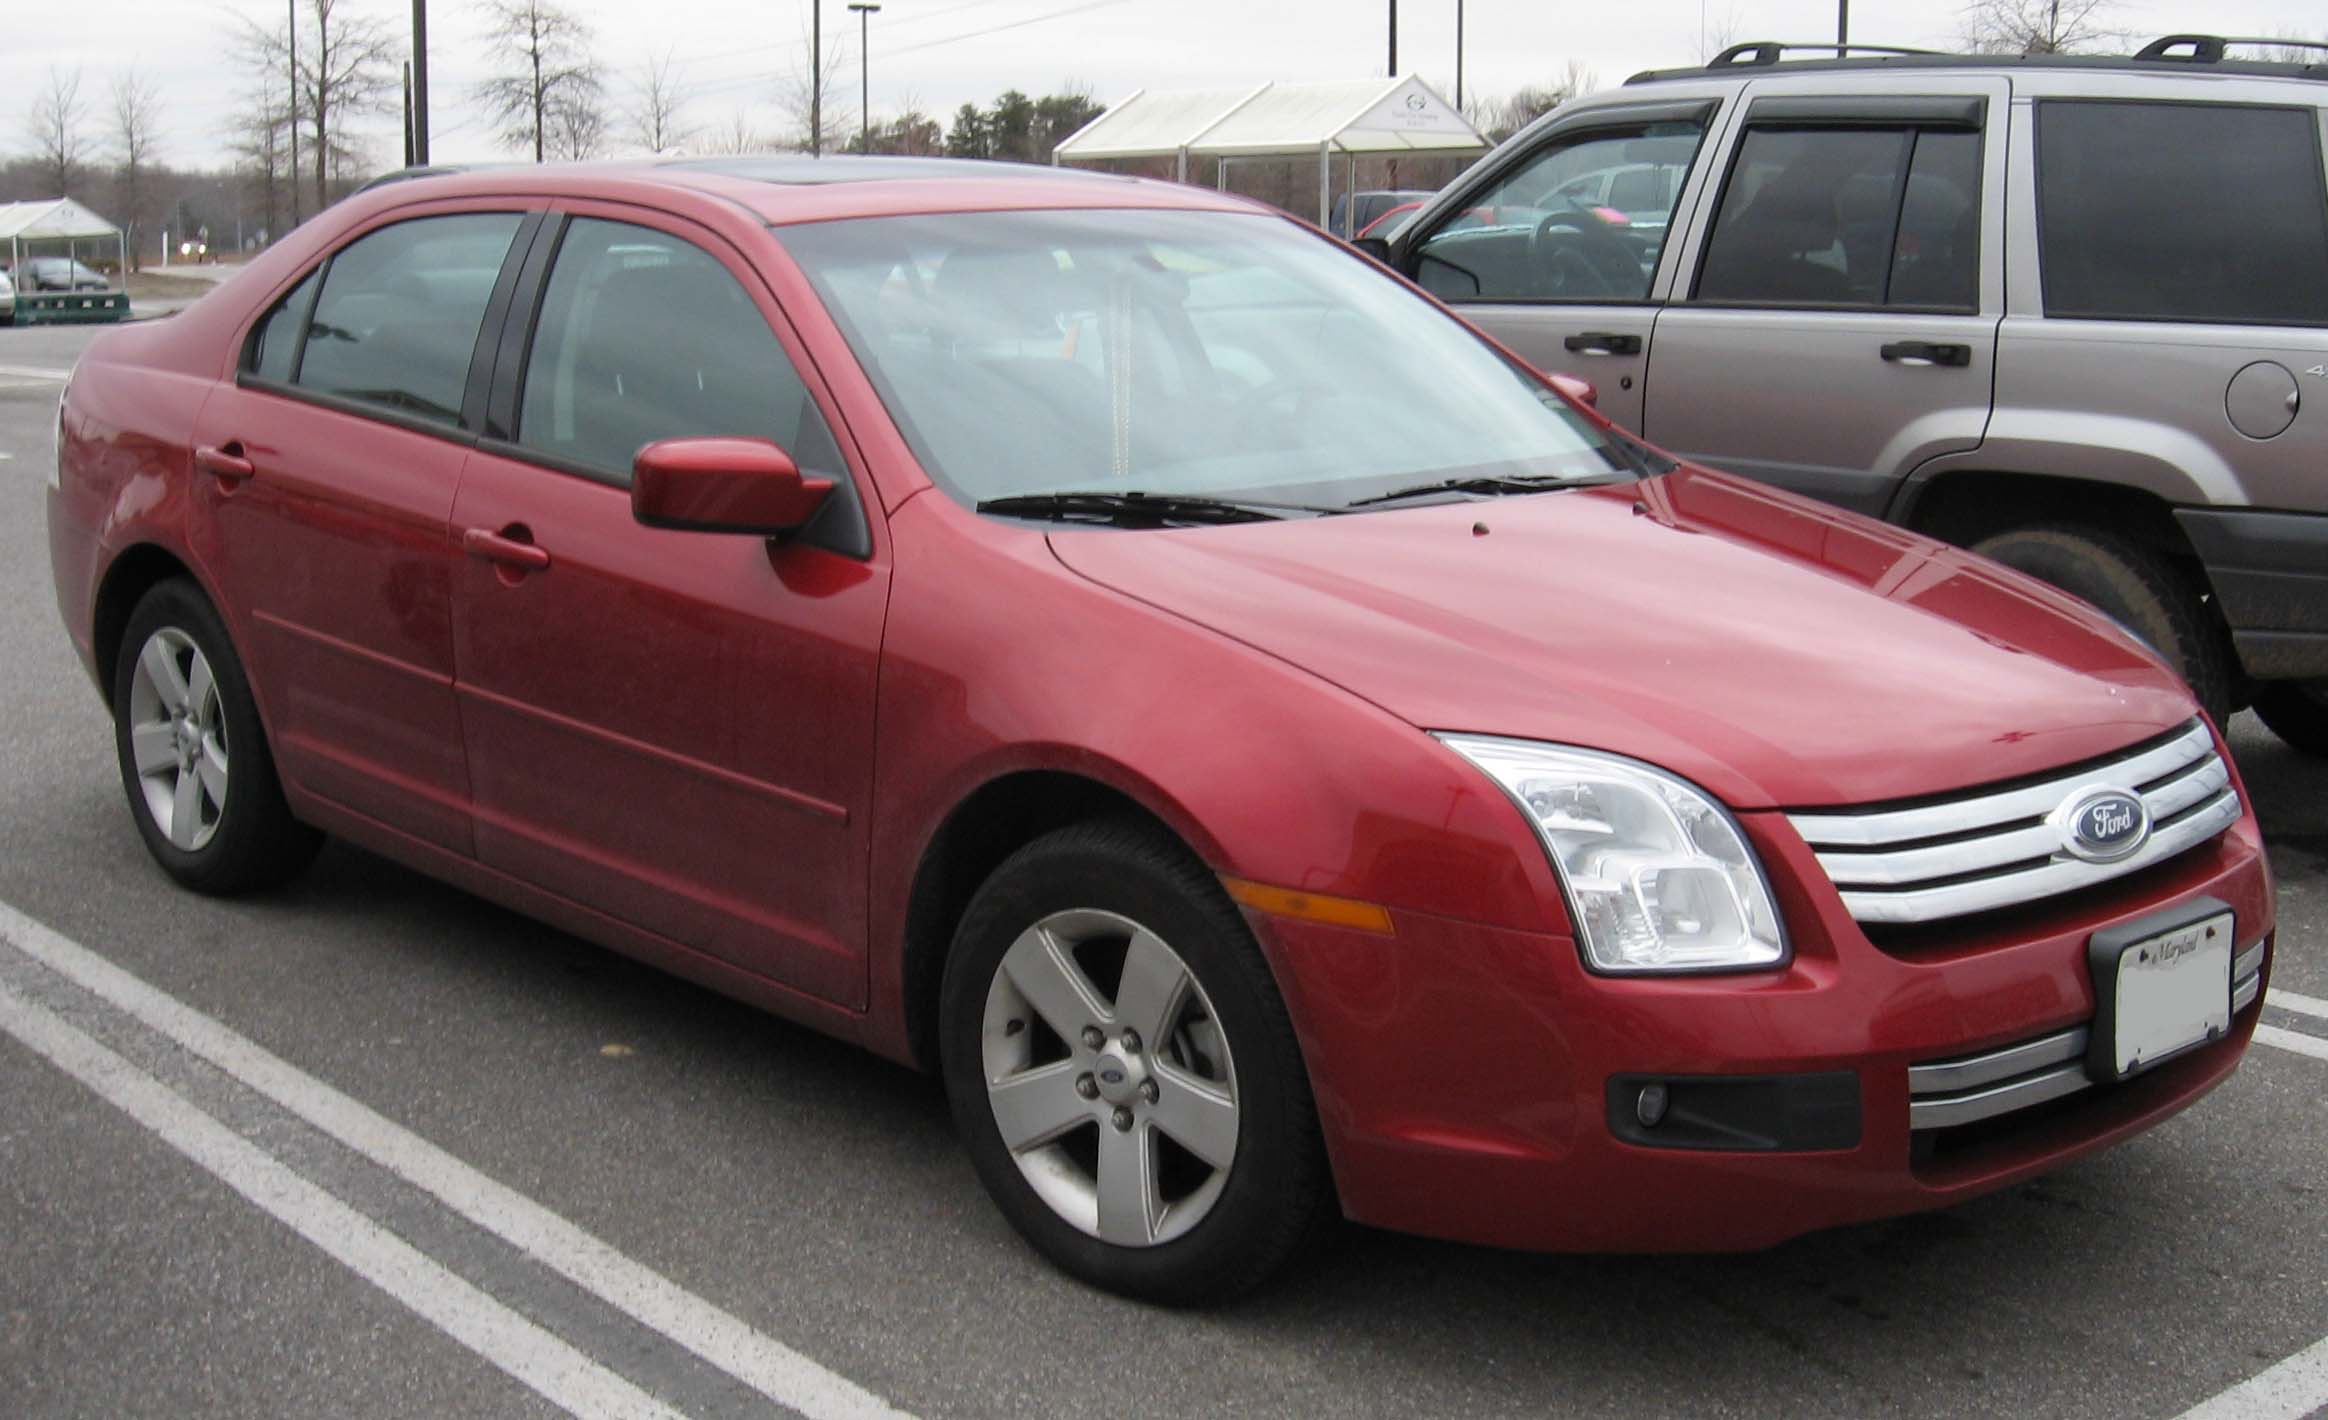 2006 Ford Fusion Information and photos MOMENTcar